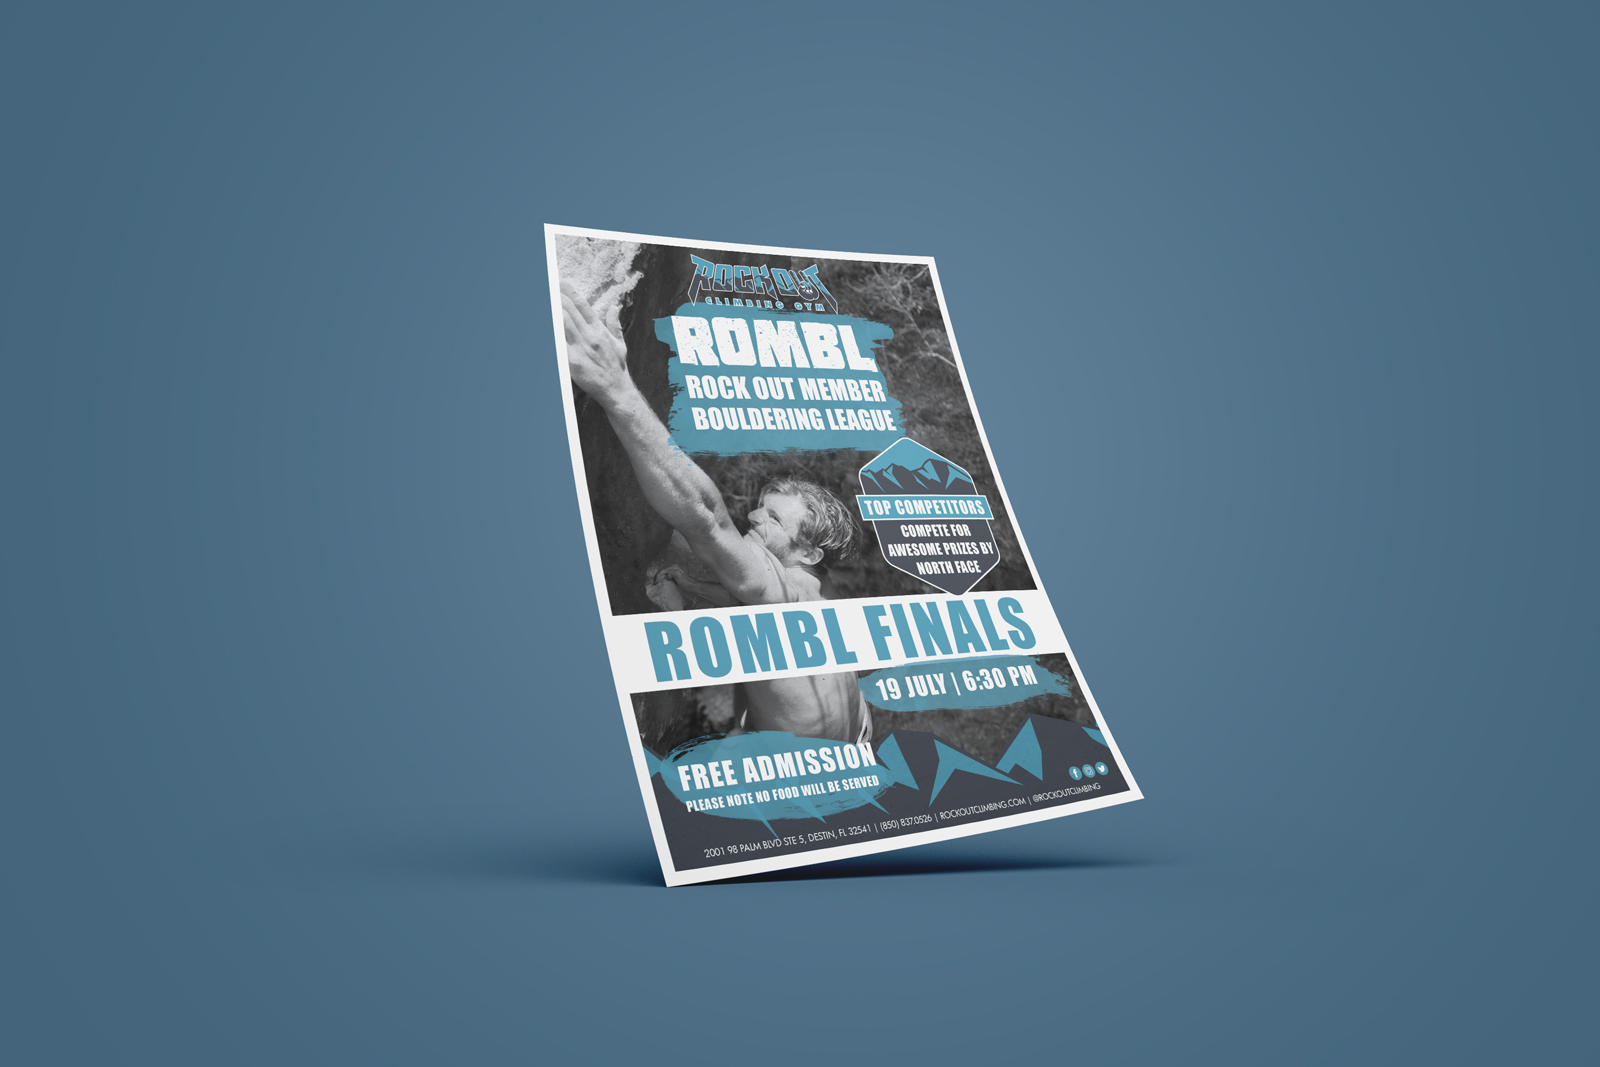 Blue and gray bouldering league flyer for indoor rock climbing gym